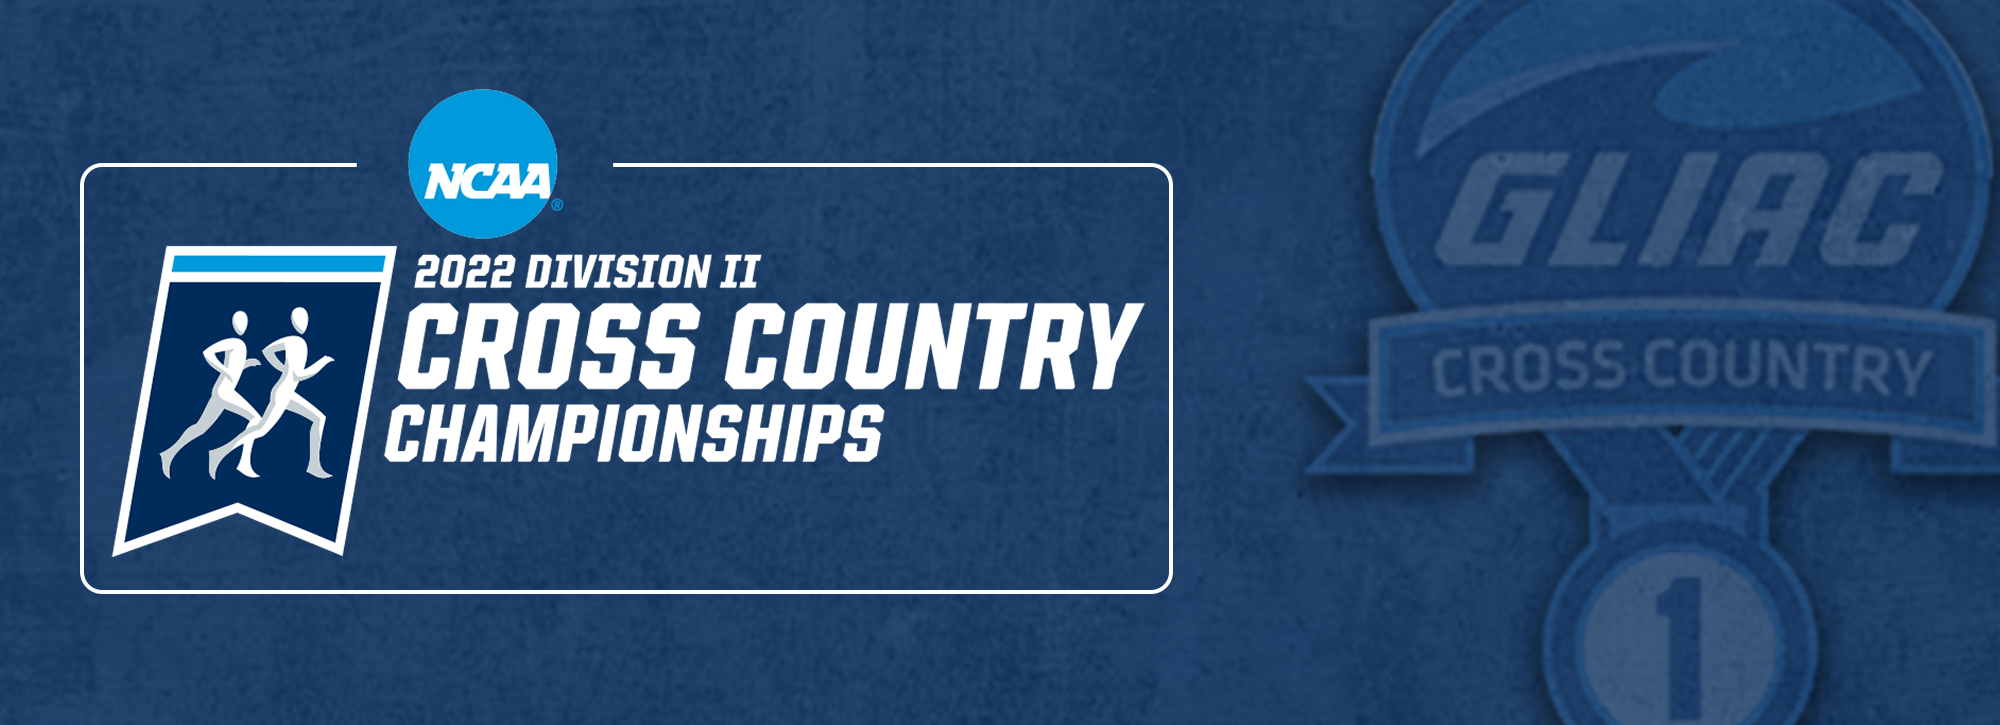 Four GLIAC cross country teams earn top 10 finishes at NCAA Championships